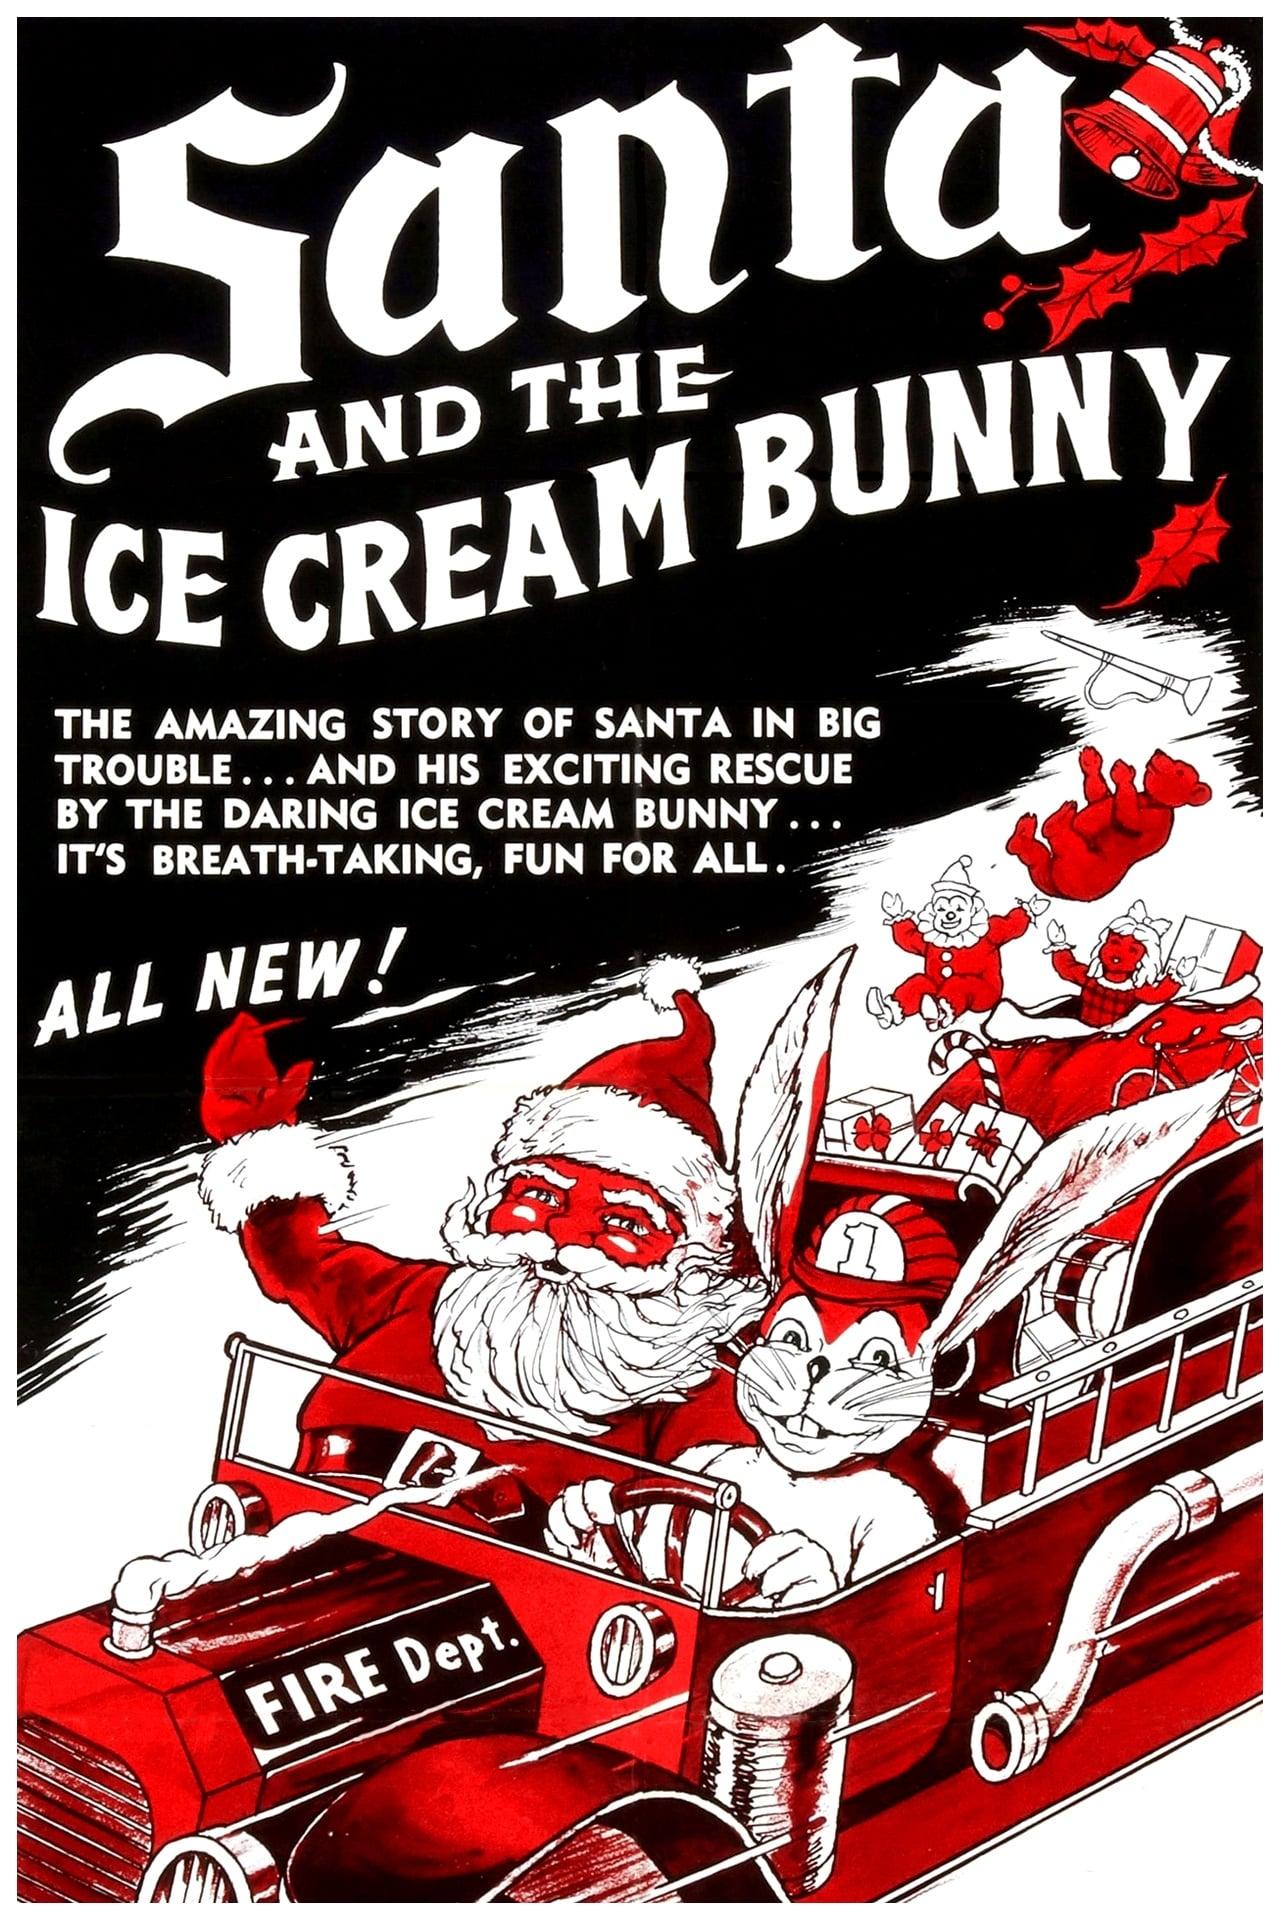 Santa and the Ice Cream Bunny poster